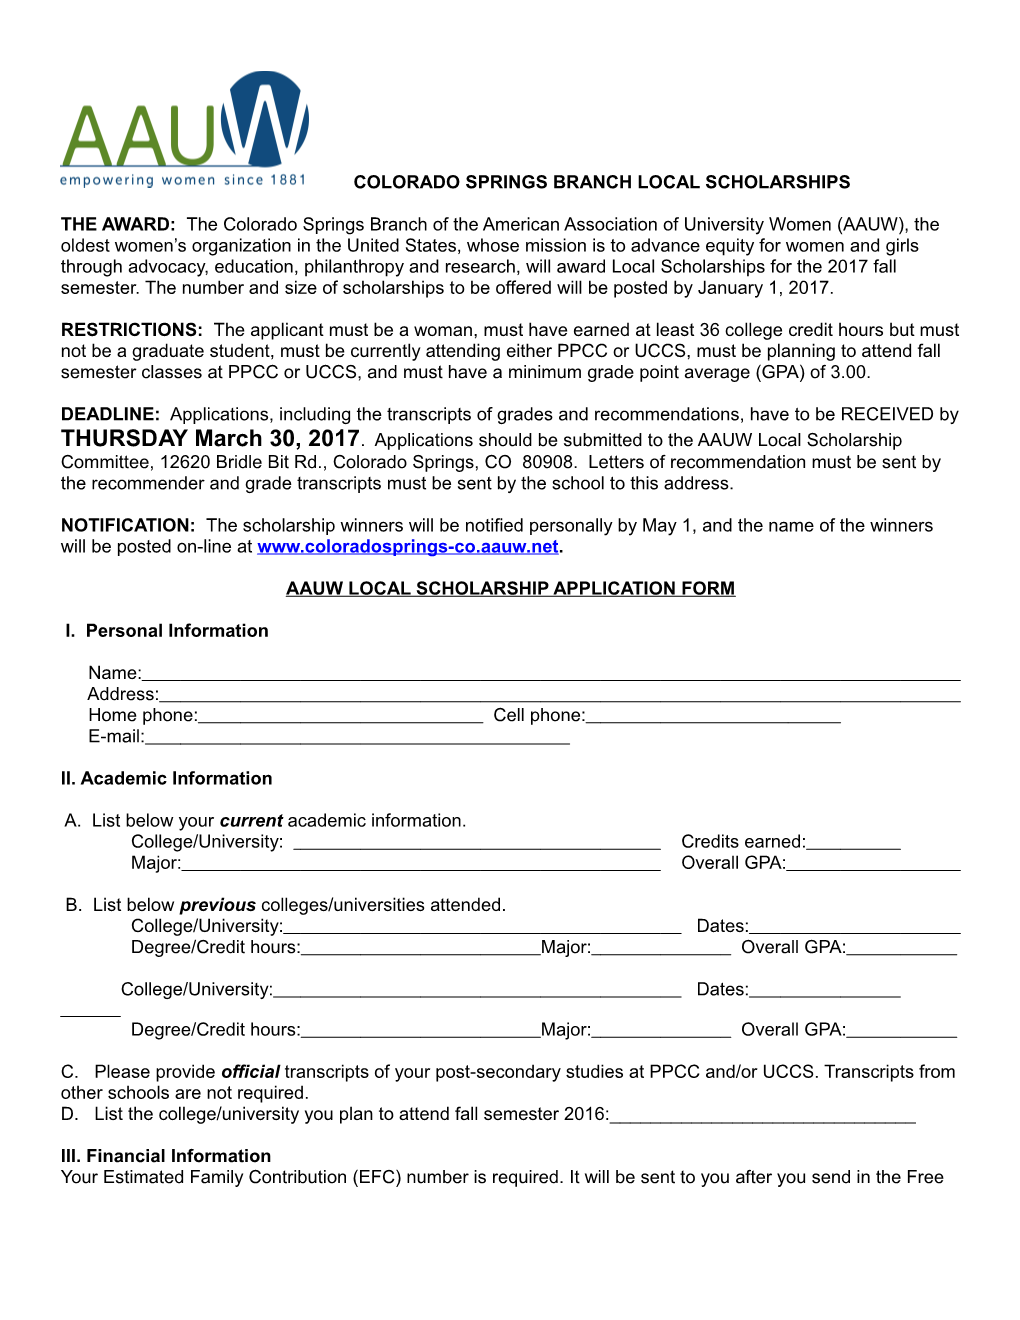 Aauw Local Scholarship Application Form